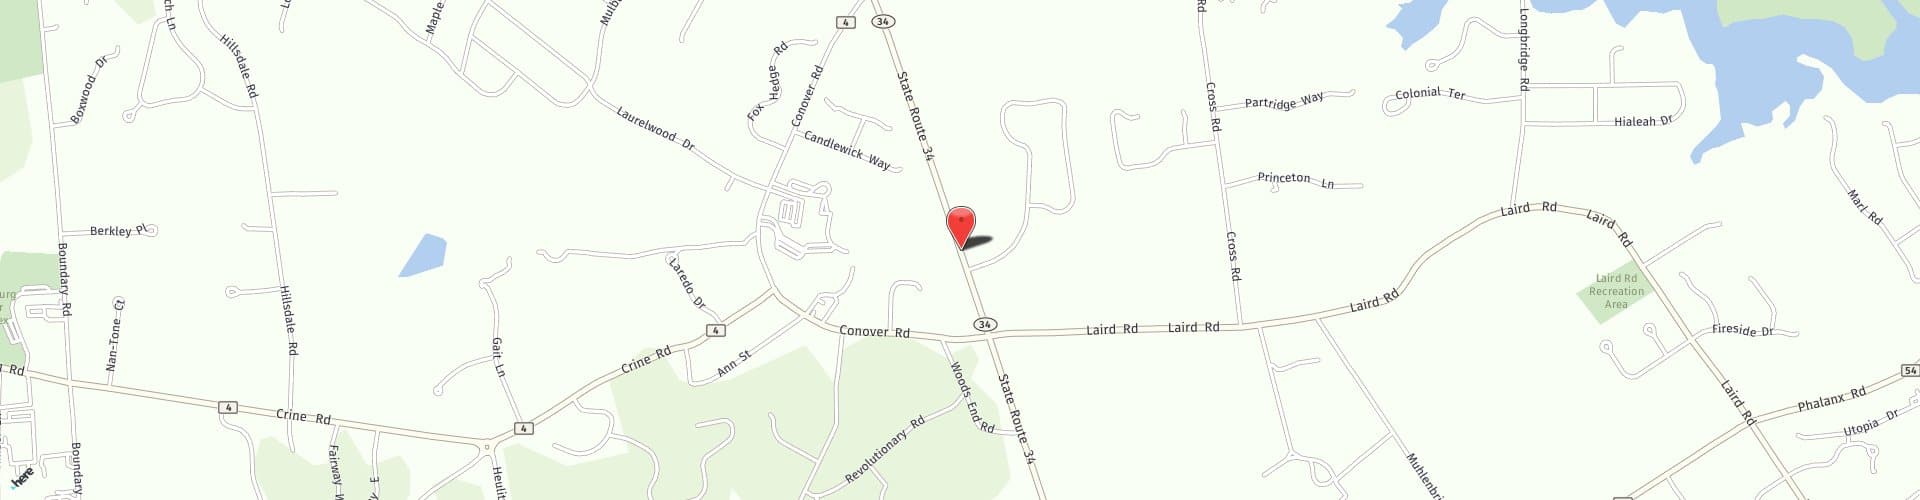 Location Map: 780 State Route 34 Colts Neck, NJ 07722